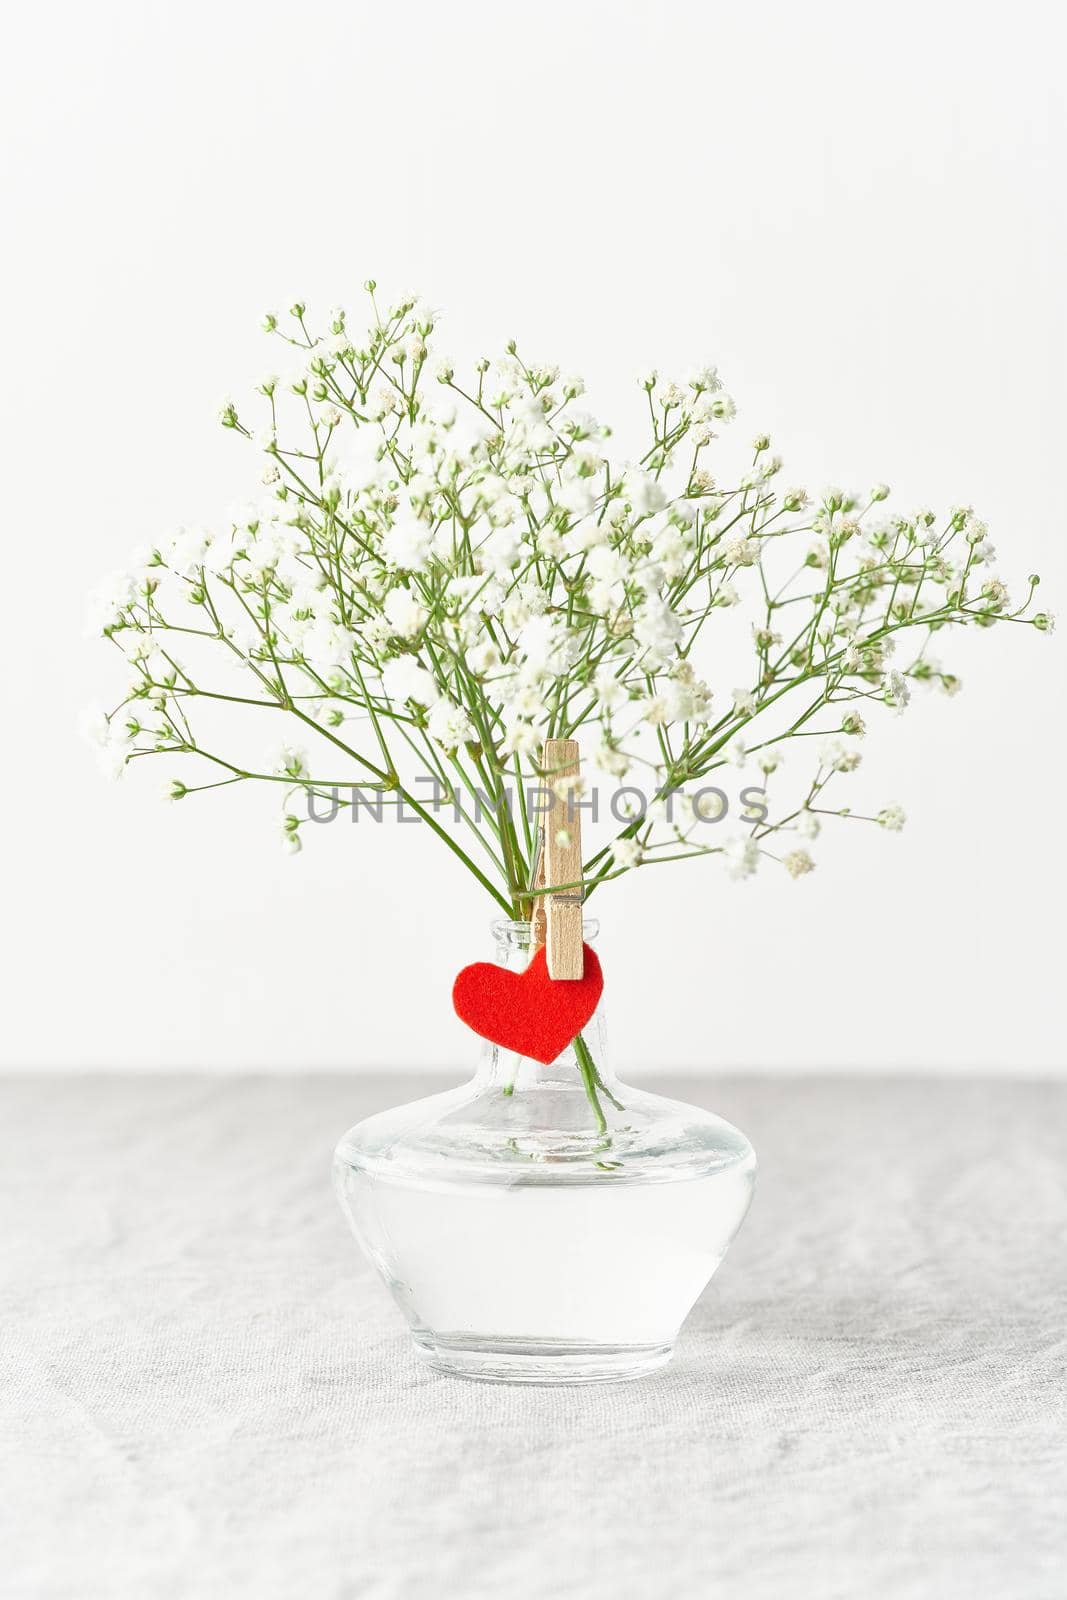 Valentine's Day. Delicate white flowers in glass vase. Red felt heart - symbol of lovers. Light white gentle pastel background. Scandinavian minimalism. Side view, copy space, vertical